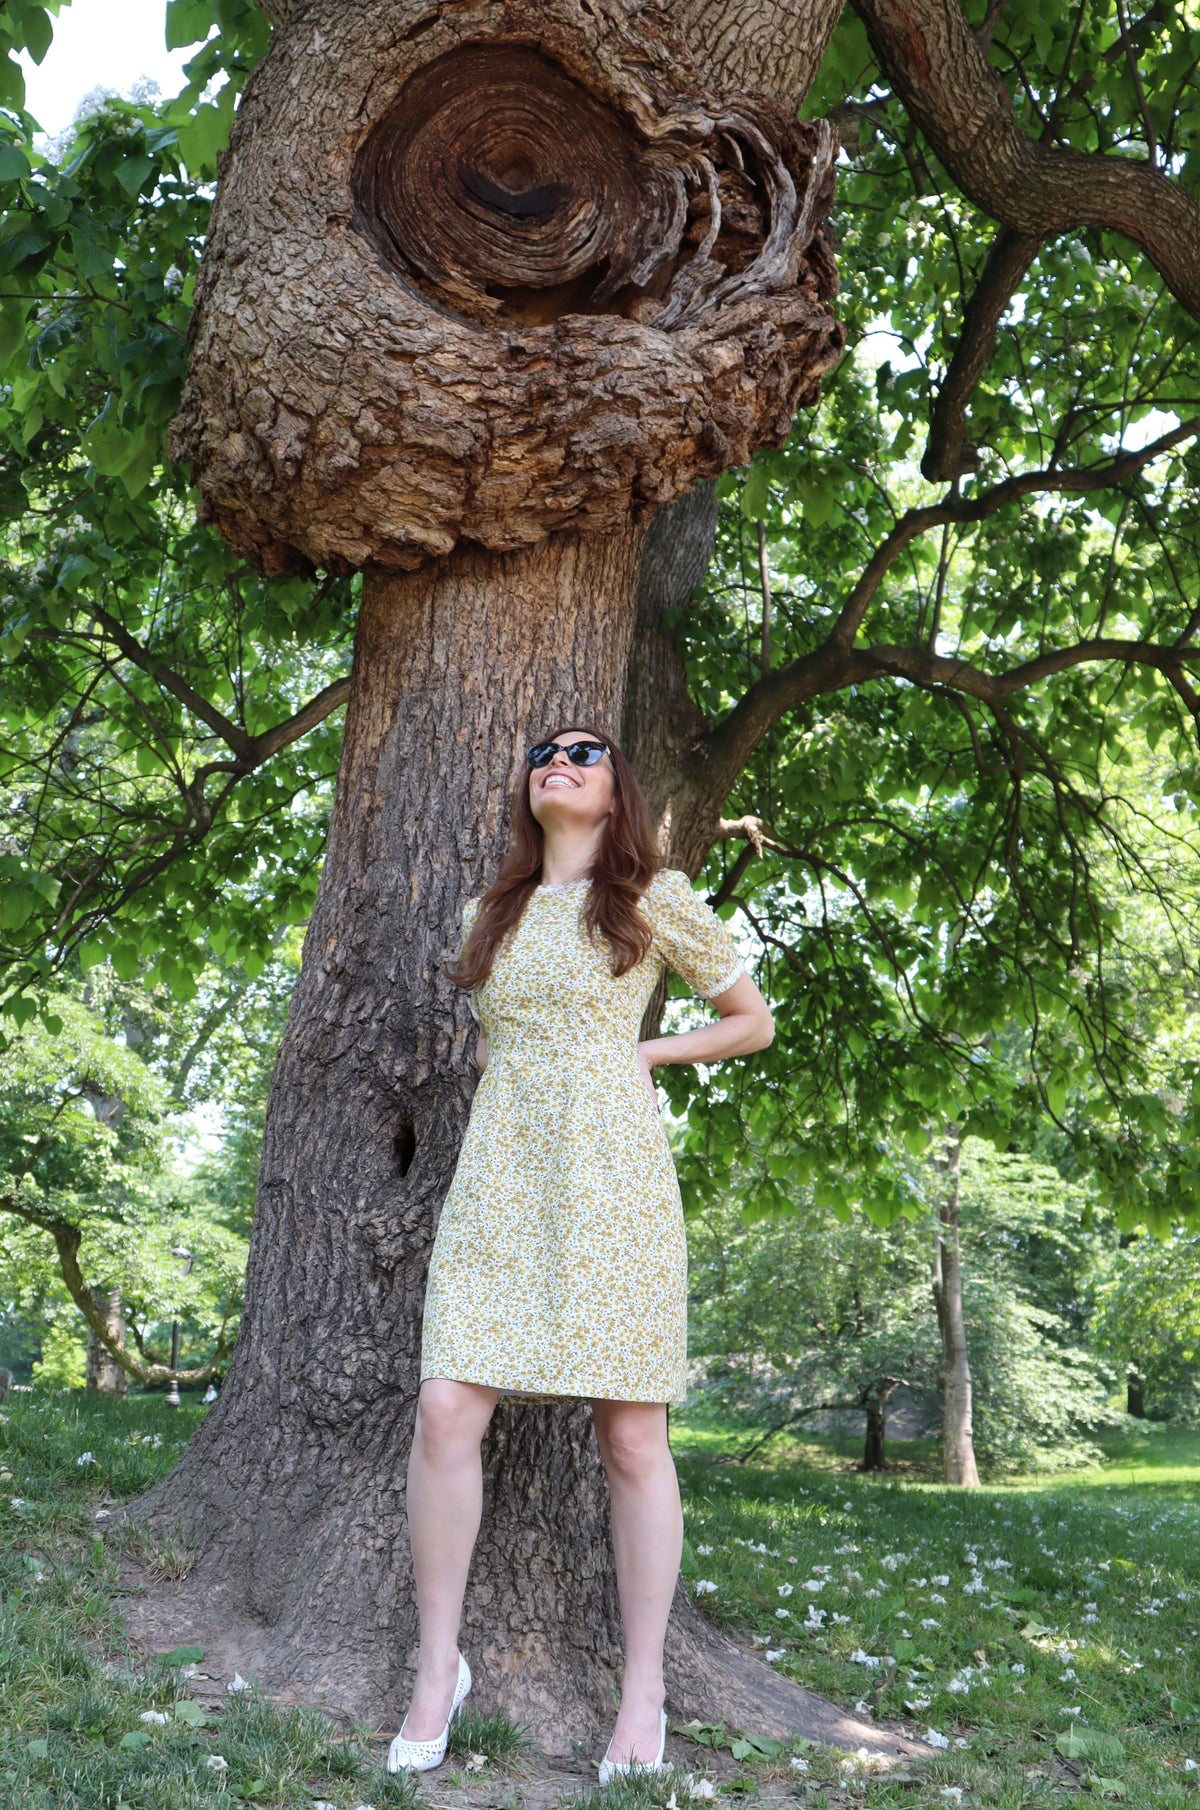 Model in short yellow floral dress with short sleeves and white daisy trim leaning on a tree.